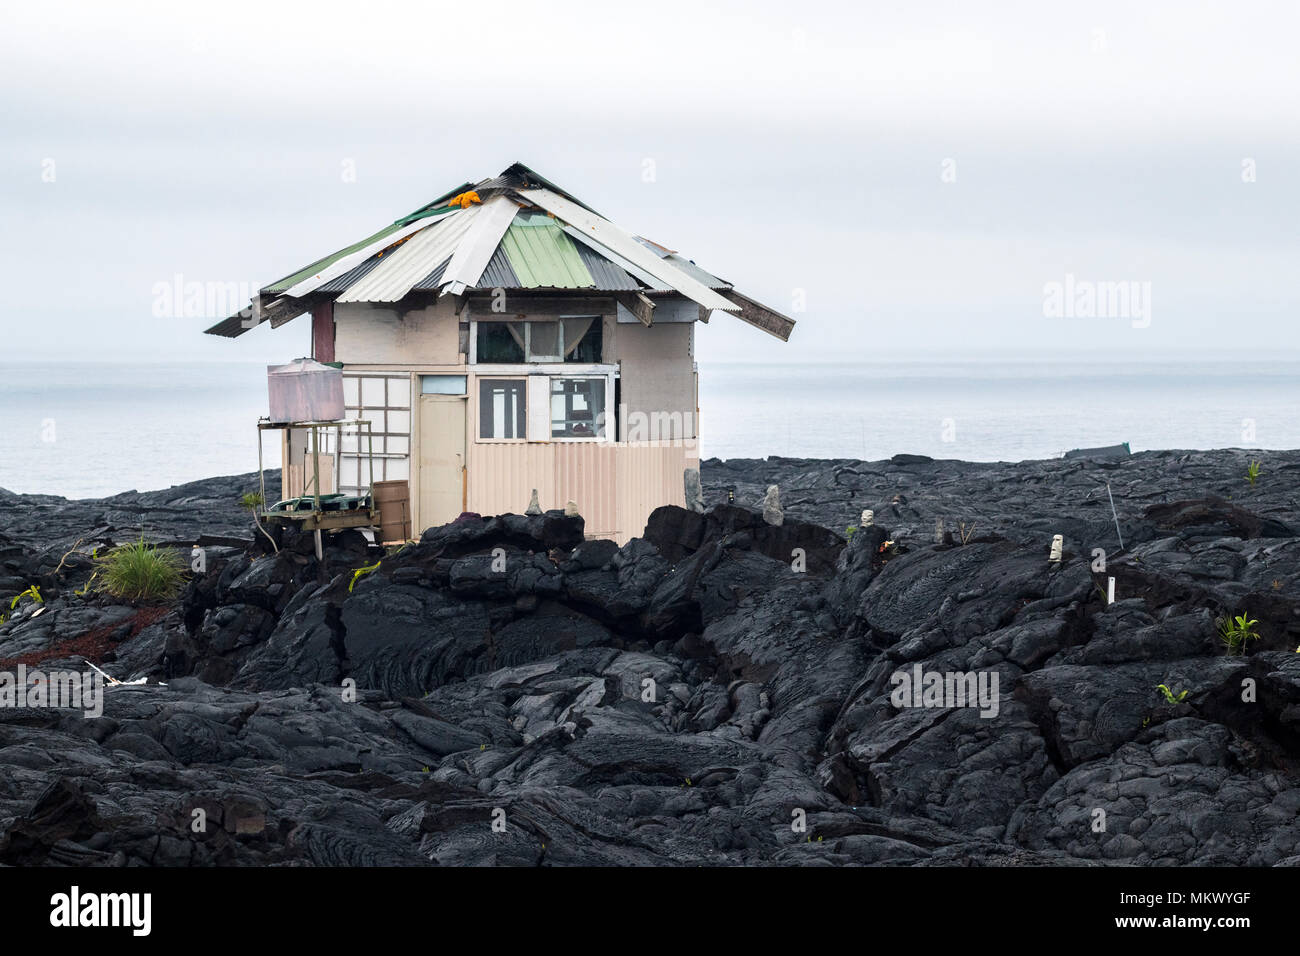 A temporary house stands in the lava fields in the former town of Kalapana in the Puna District on the Big Island of Hawaii. Stock Photo